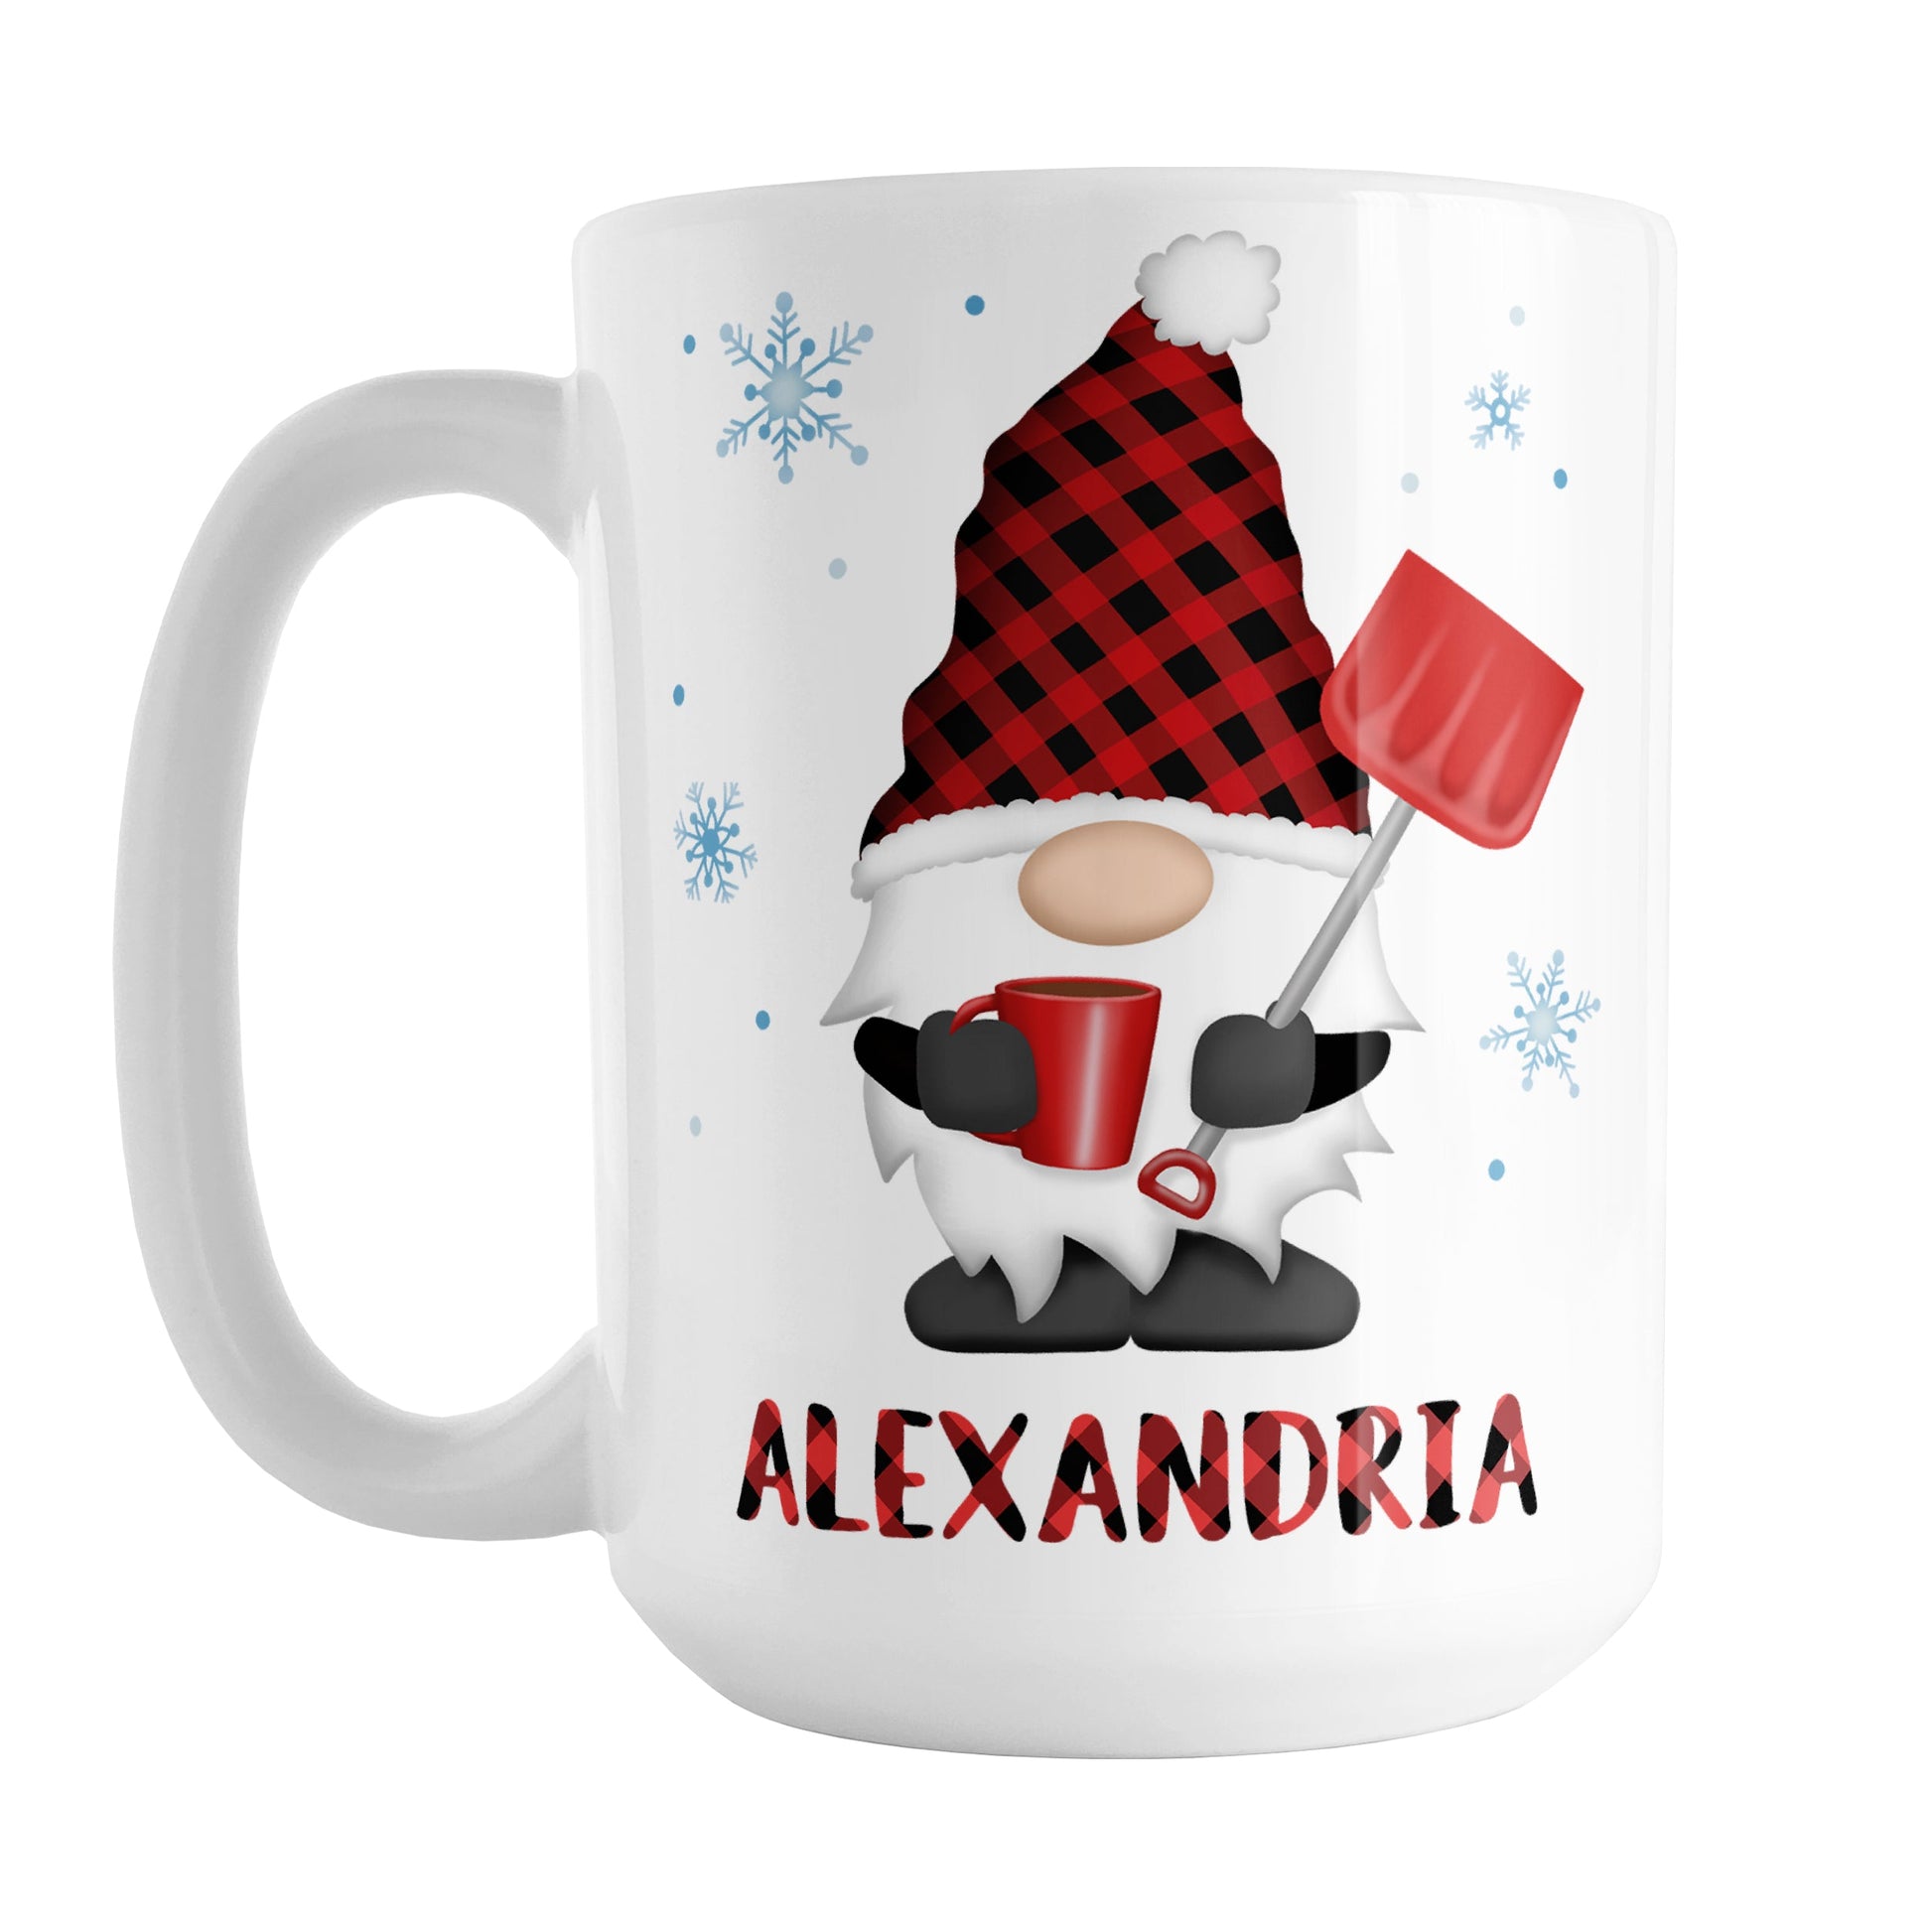 Personalized Red Buffalo Plaid Gnome Mug (15oz) at Amy's Coffee Mugs. A ceramic coffee mug designed with a gnome with a red and black buffalo plaid pattern hat and holding a hot beverage and snow shovel with snowflakes around it. This cute buffalo plaid gnome illustration, along with your name personalized in buffalo plaid below the gnome, is on both sides of the mug. 